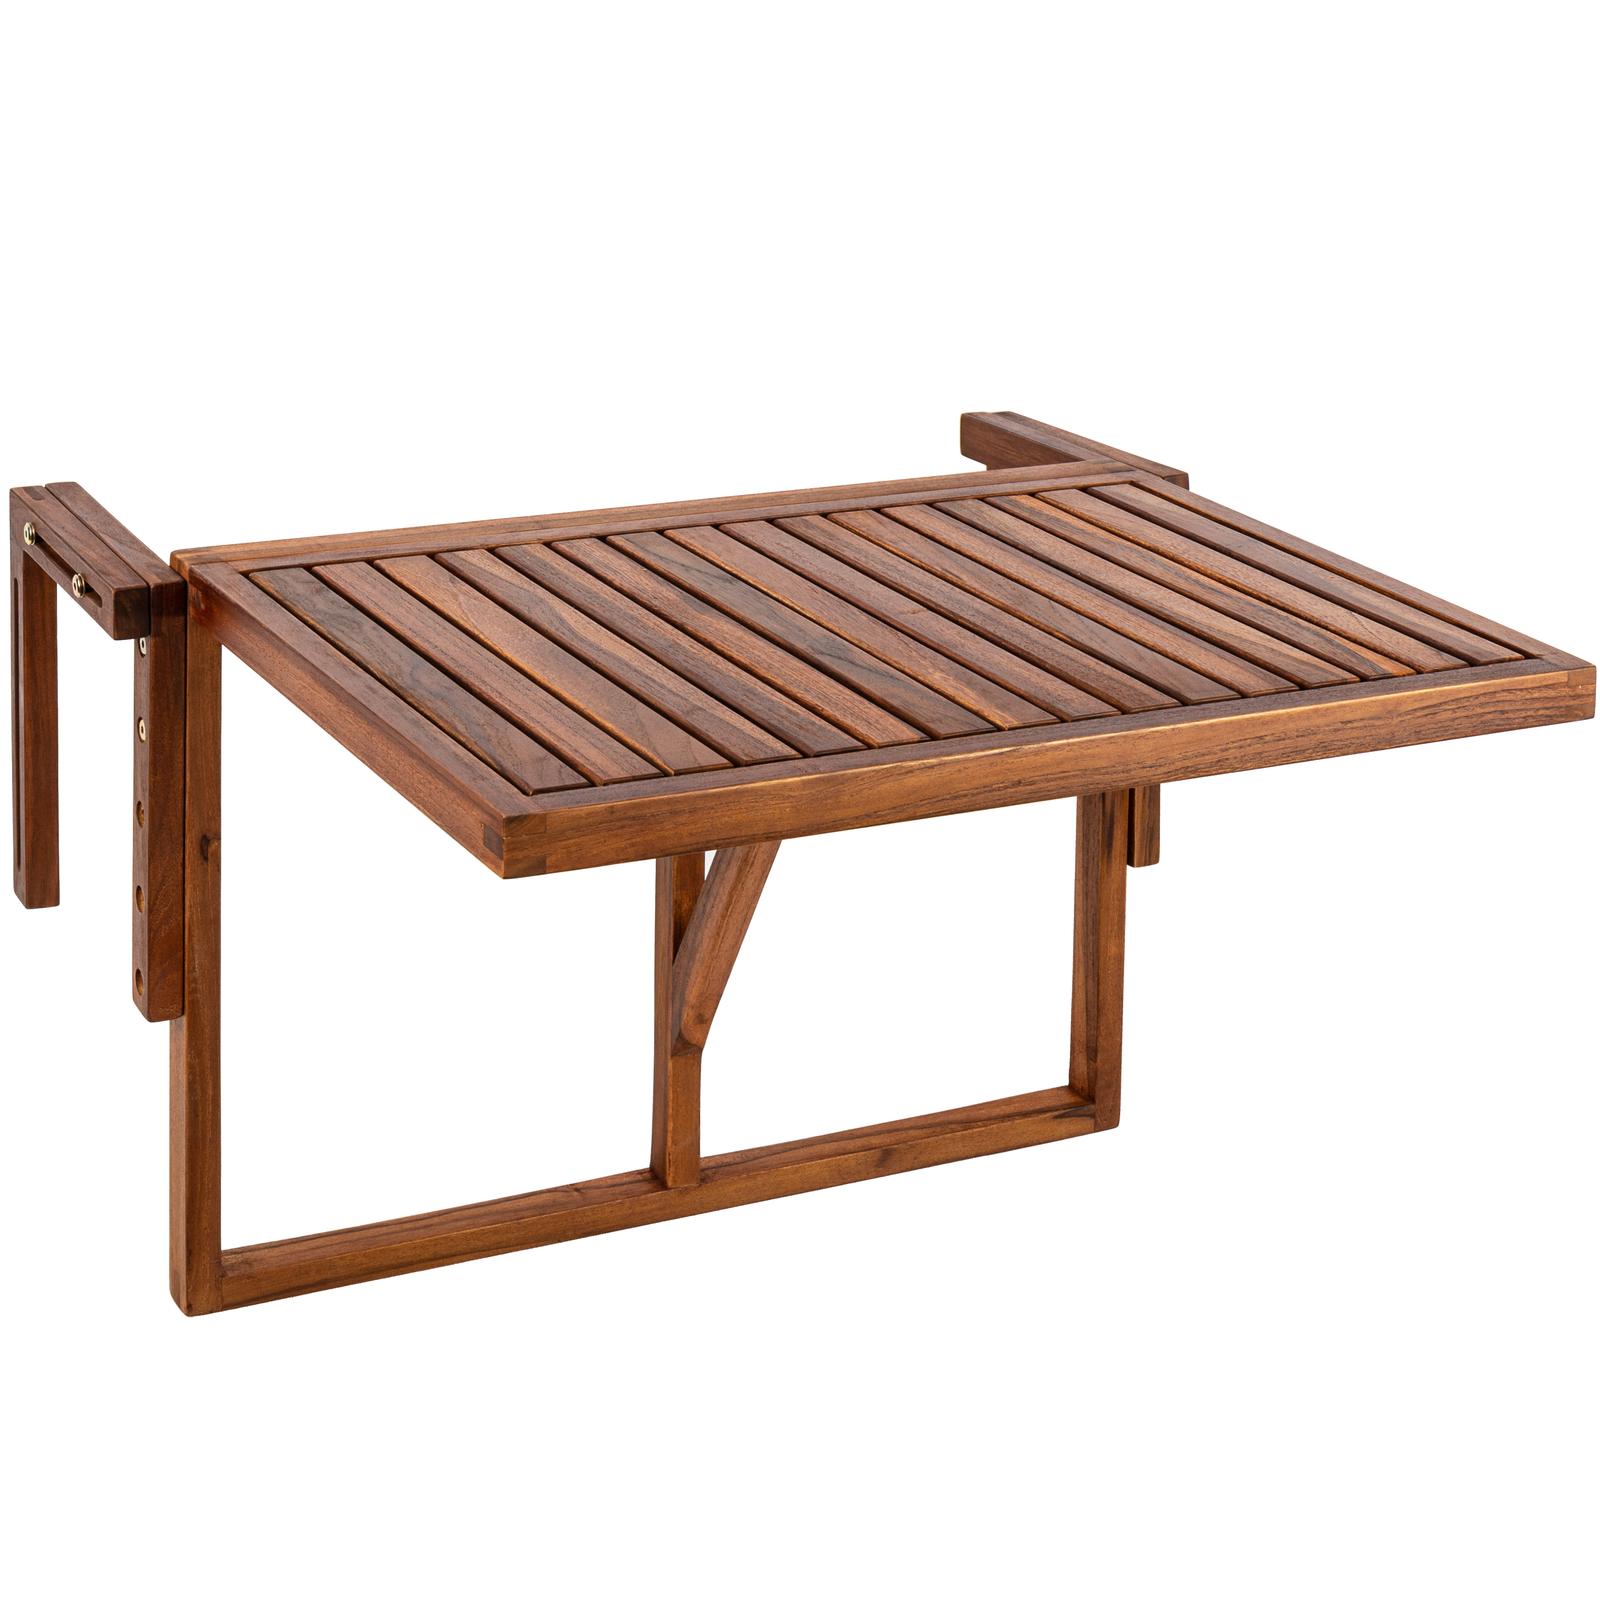 Folding table 60 x 40 cm in certified teak wood for outdoor balcony  Cablematic